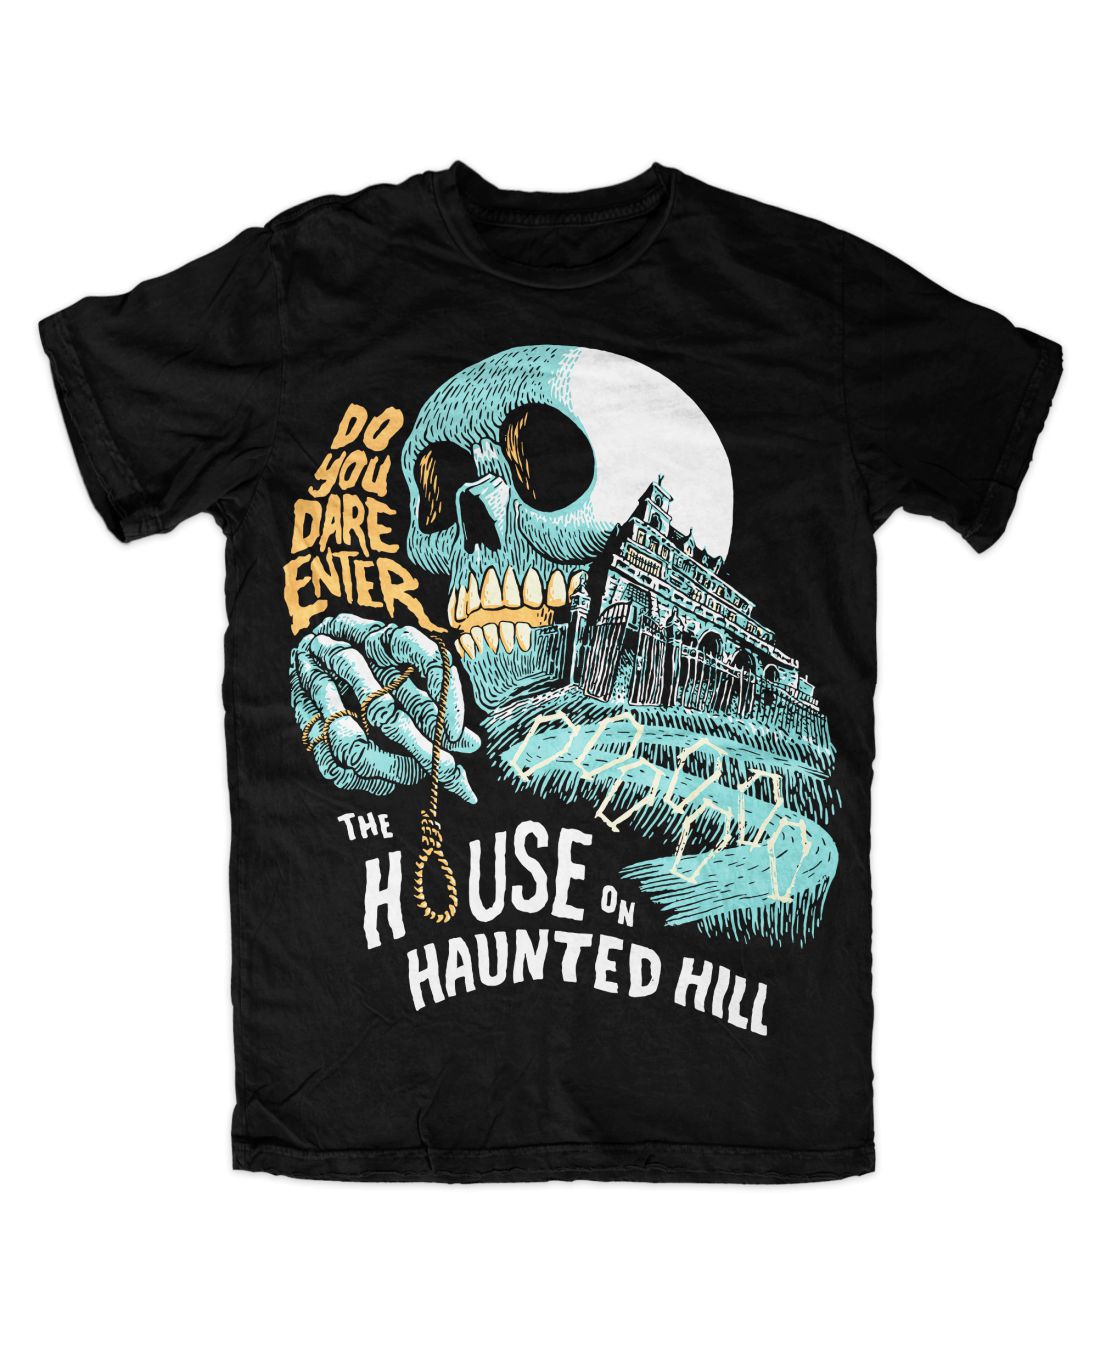 The House On Haunted Hill 001